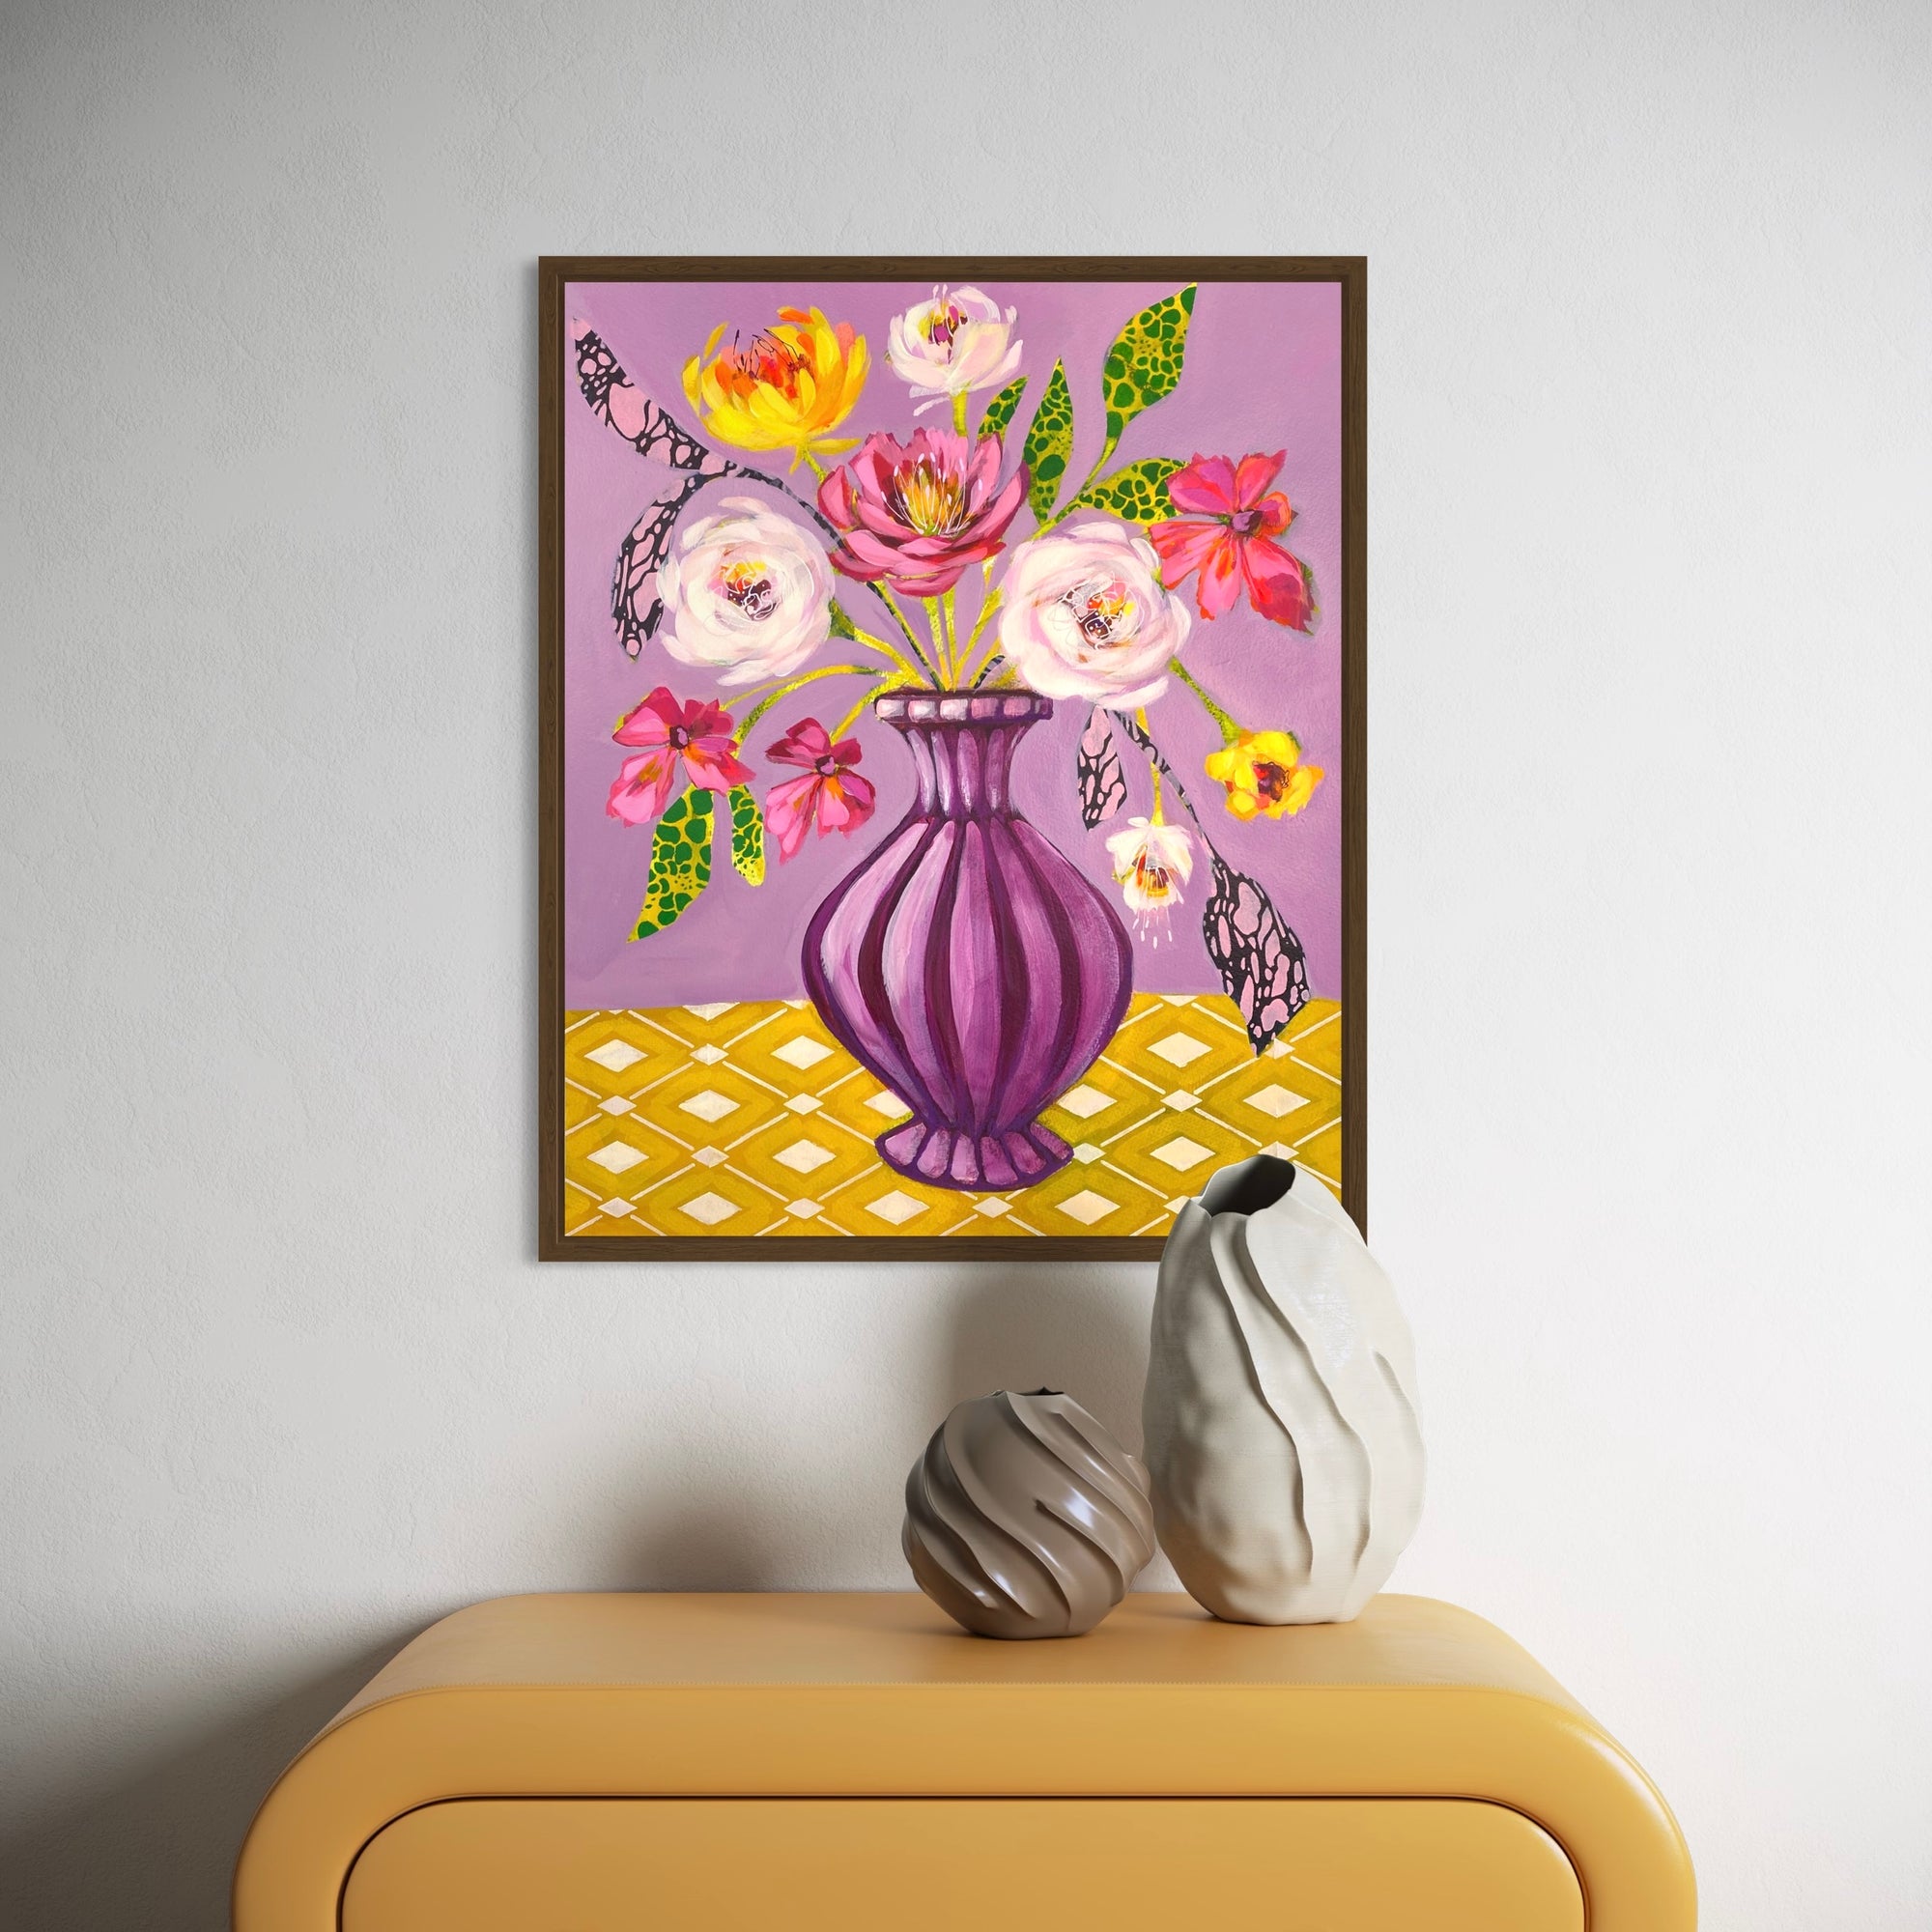 Stylised flower in vase painting mauve and mustard, framed in oak above yellow drawers